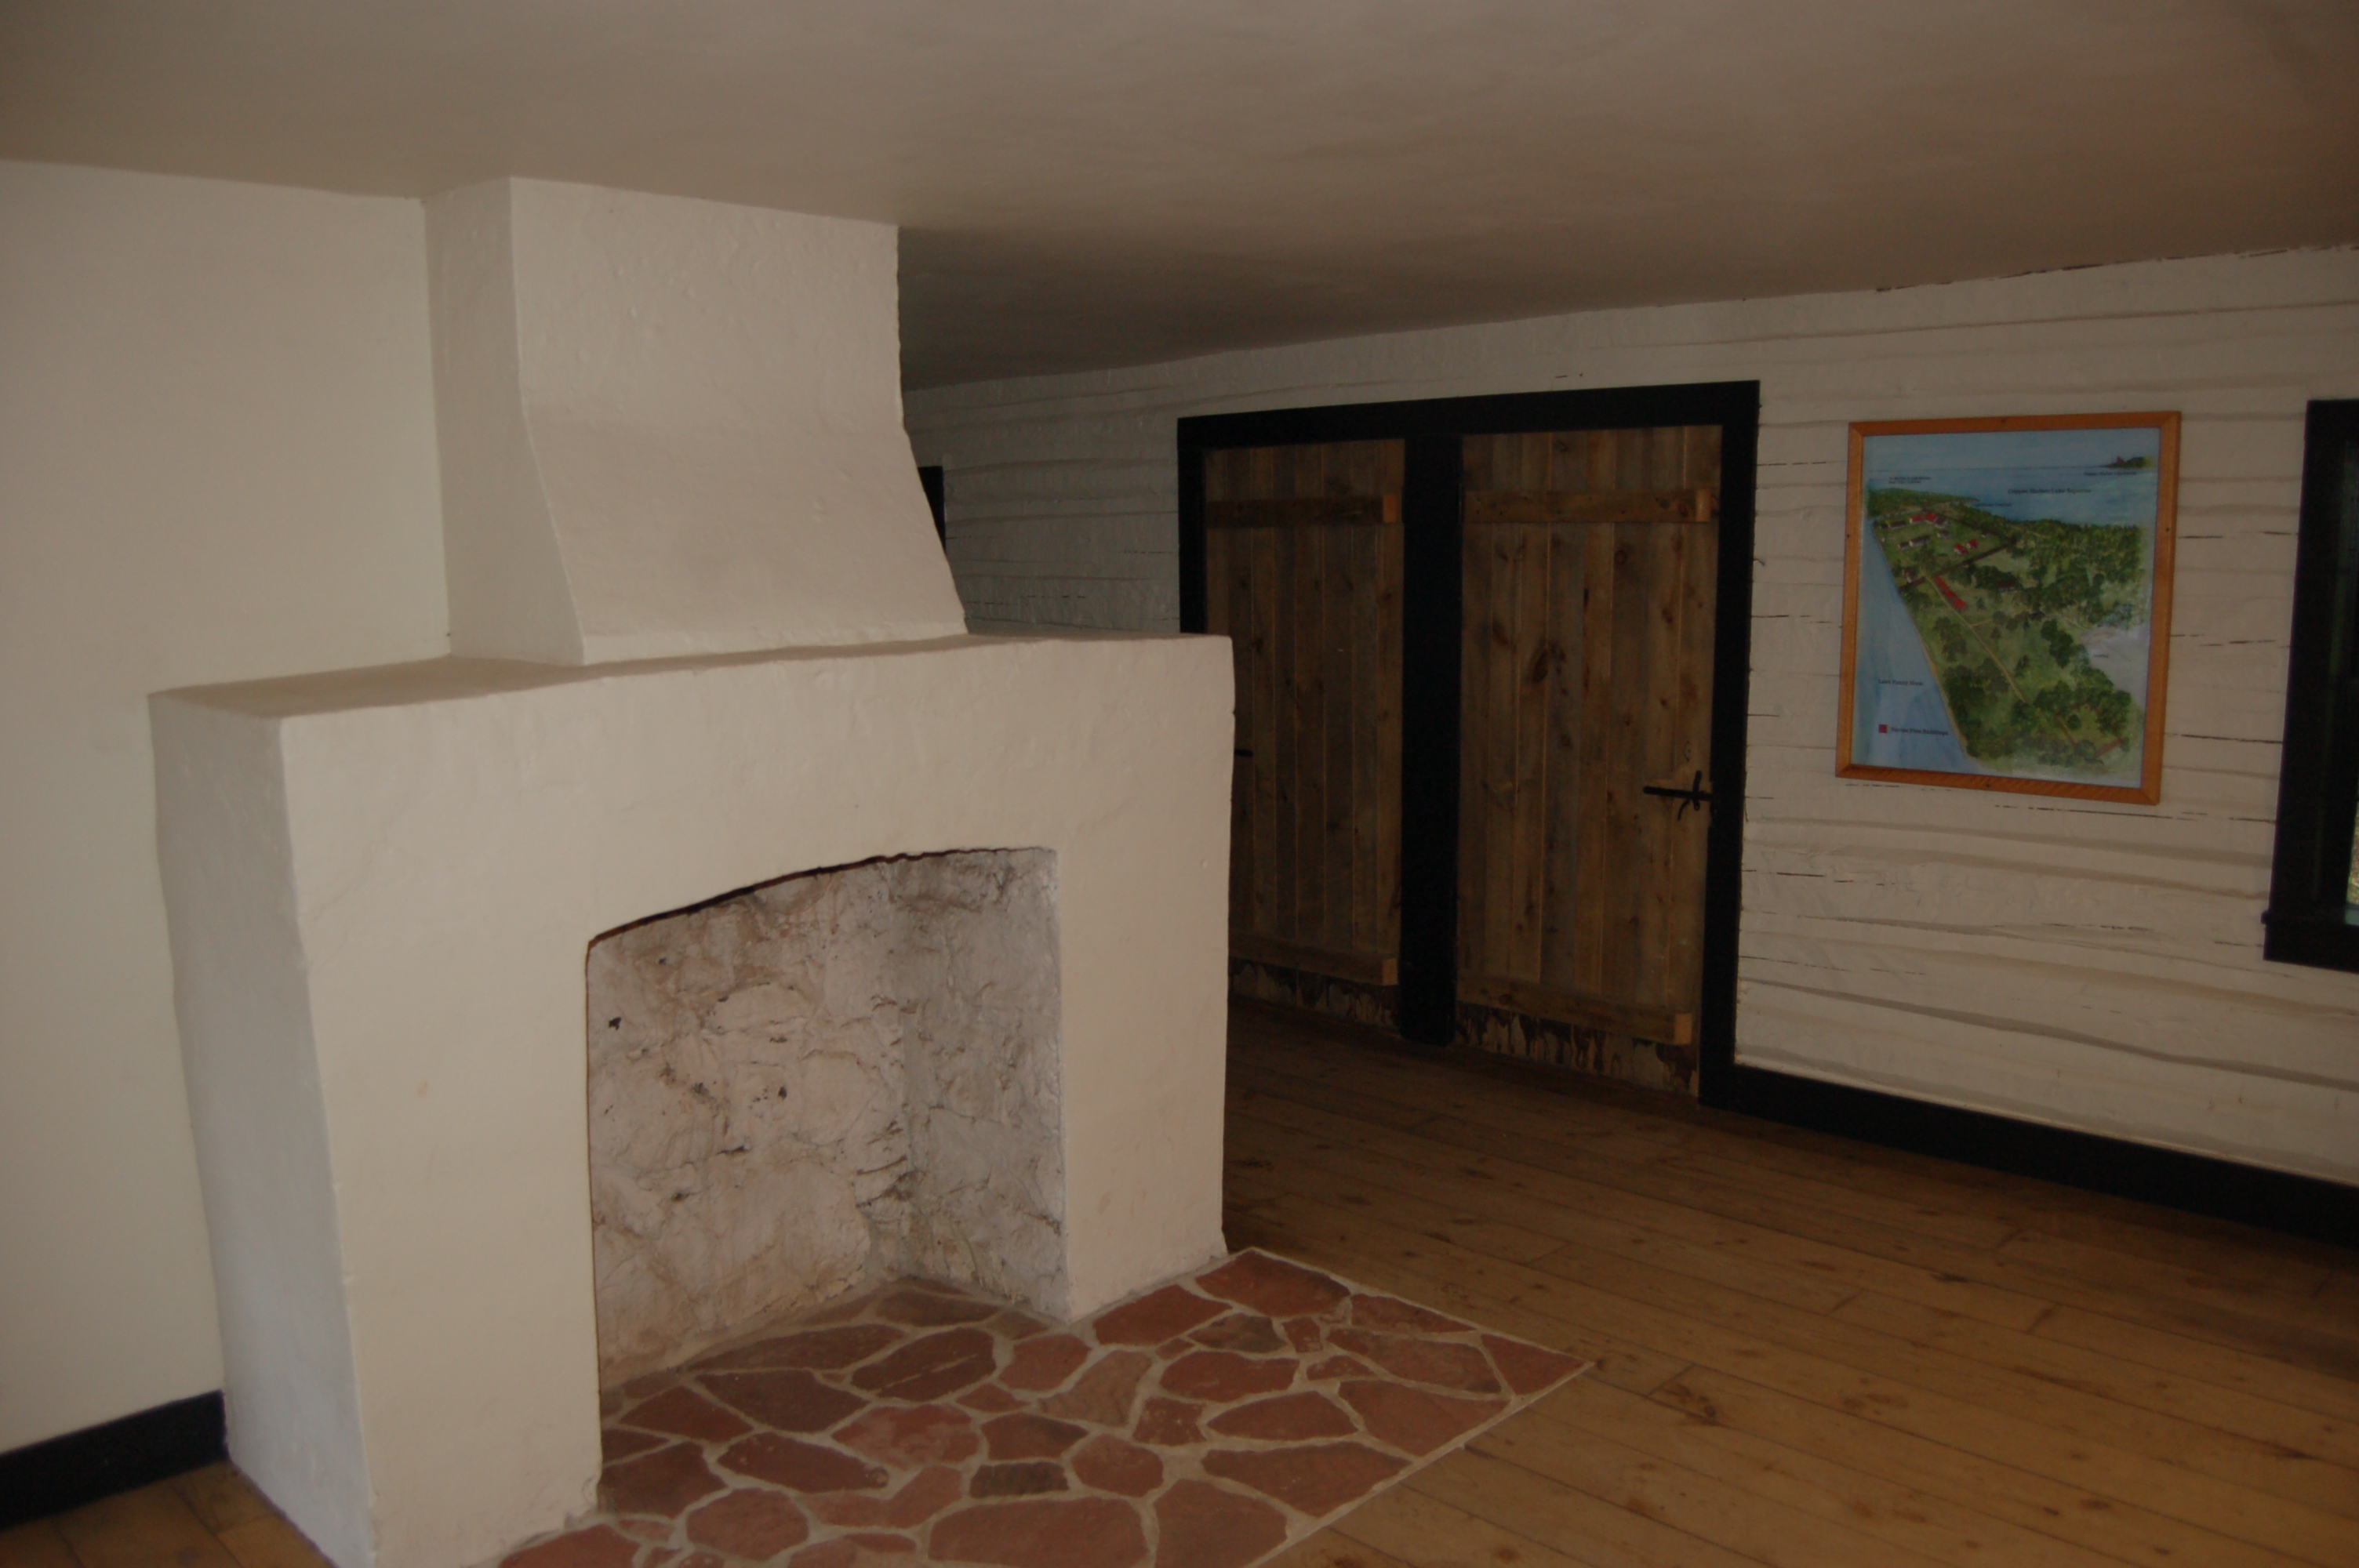 Fort Wilkins Historic State Park Building Interior